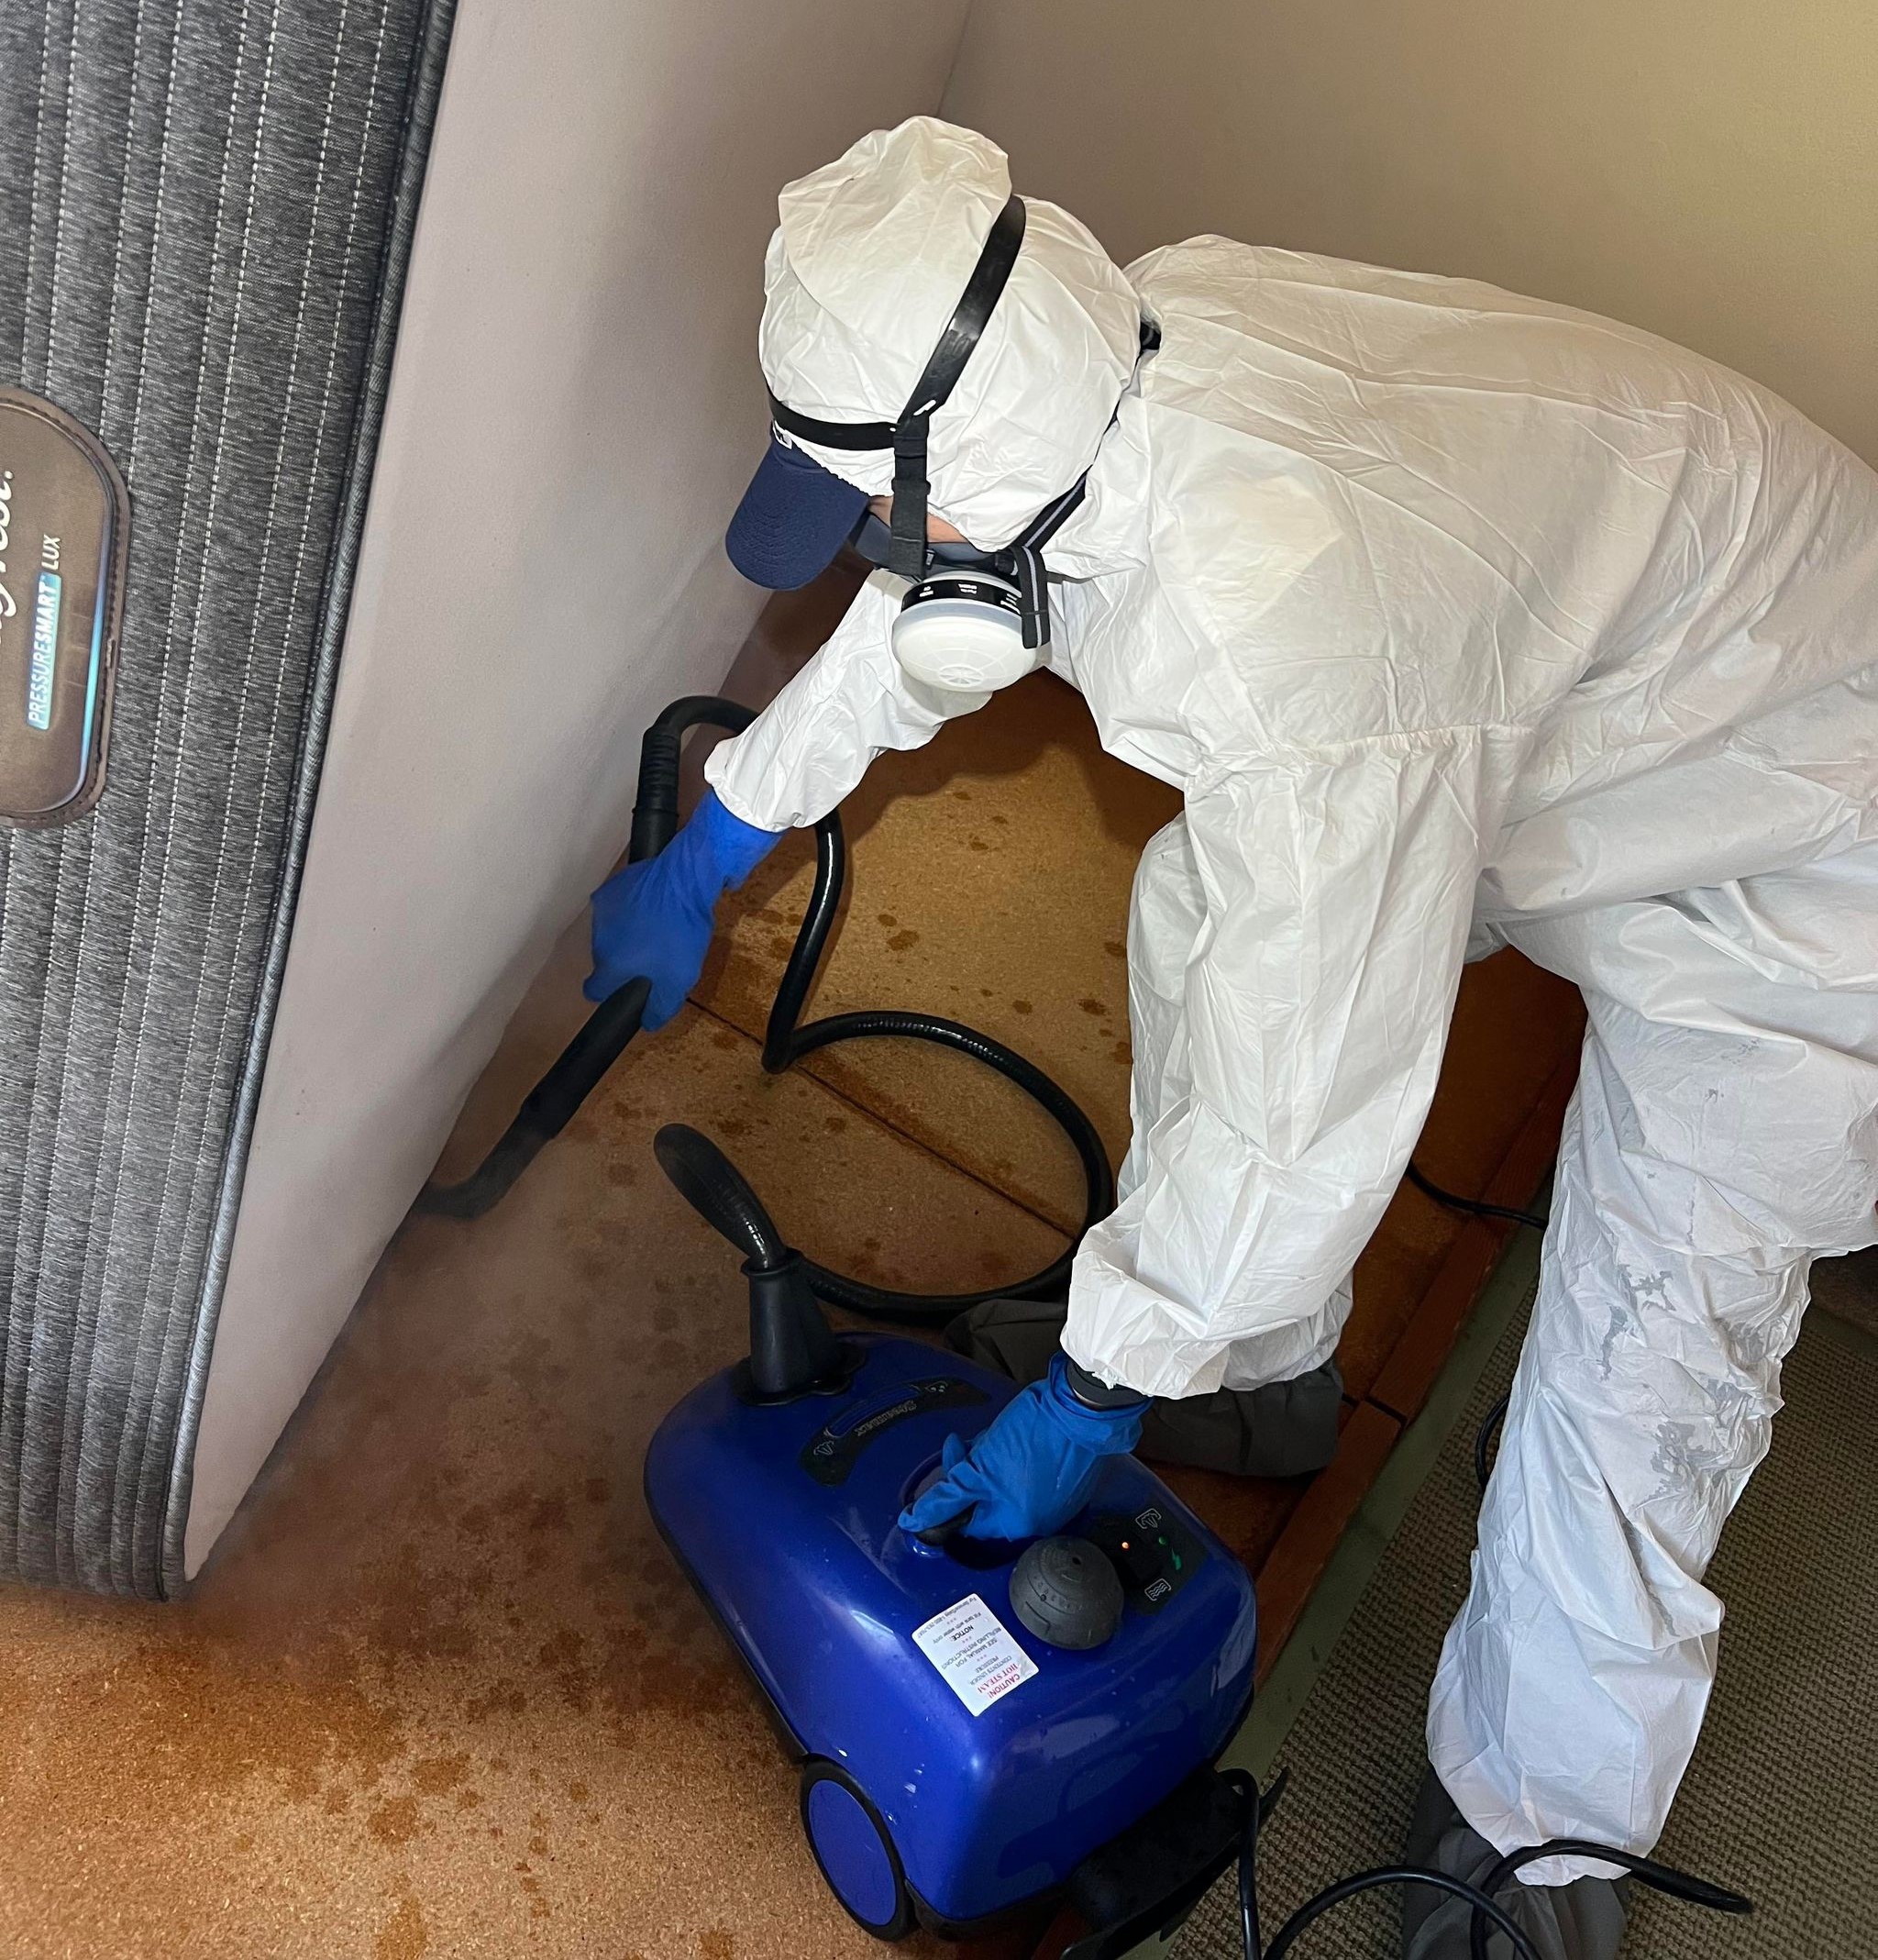 Releasing Fumes to Kill Bed Bugs